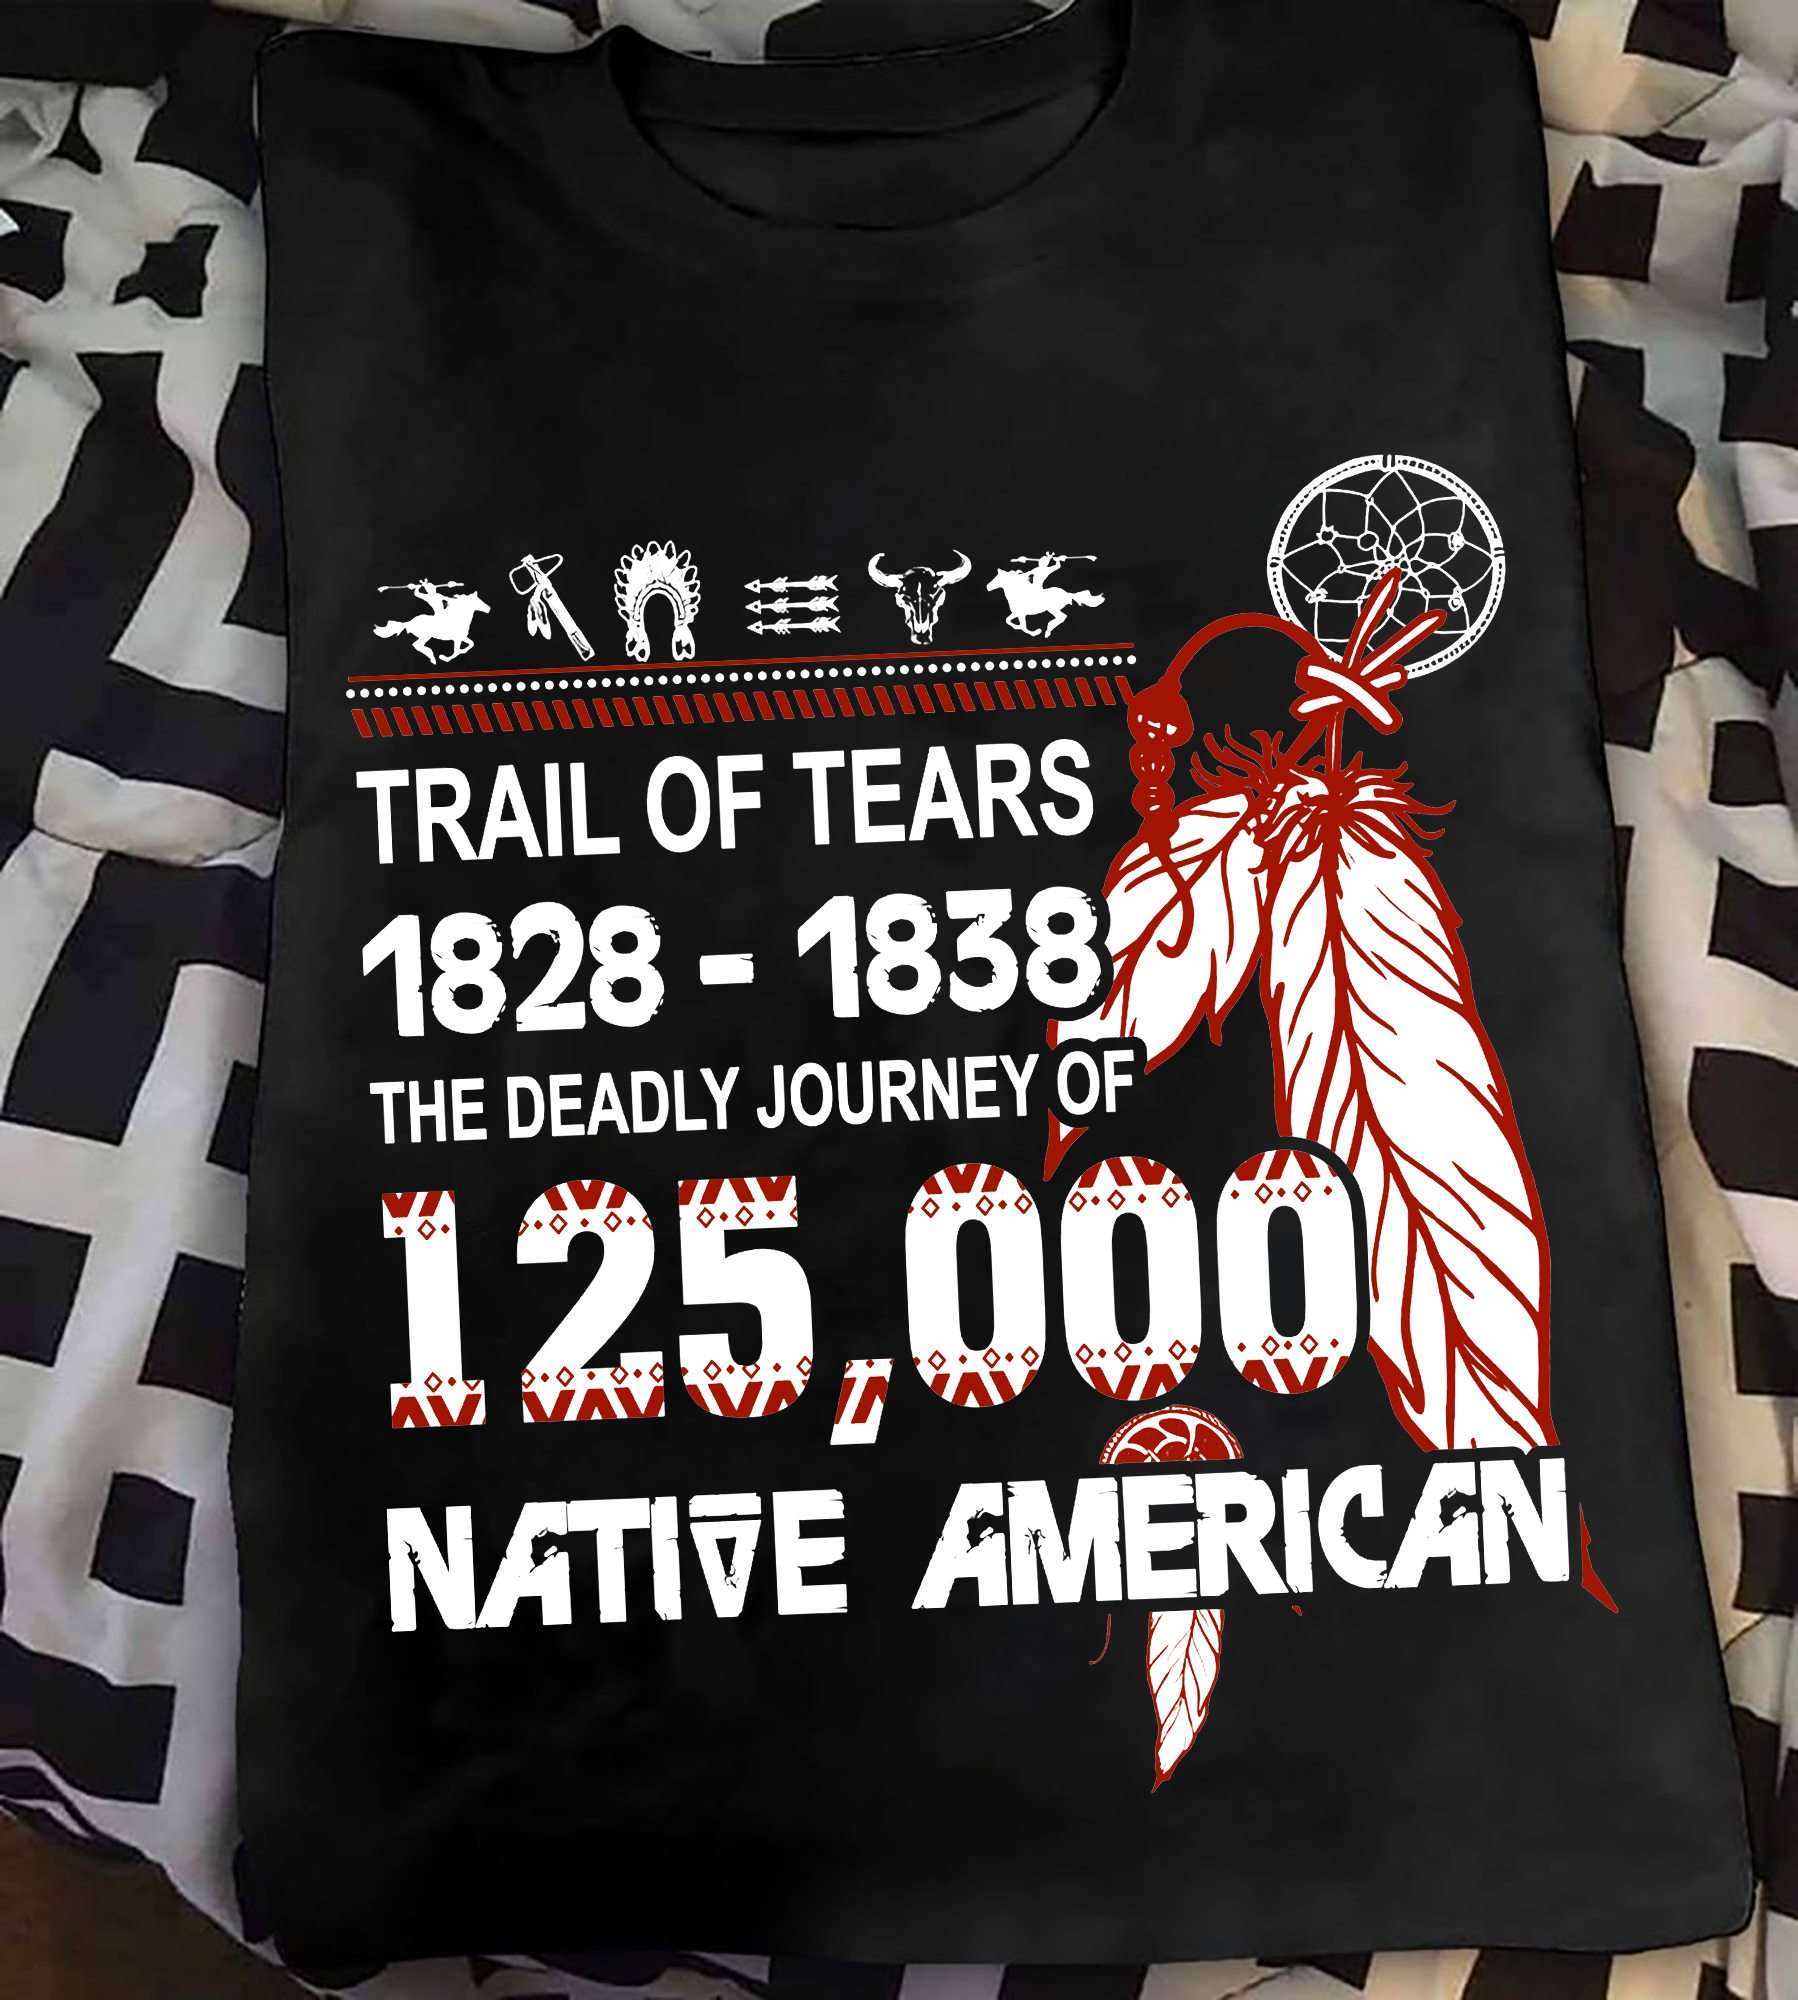 Trail of tears 1828 1838 the deadly journey of 125000 native american